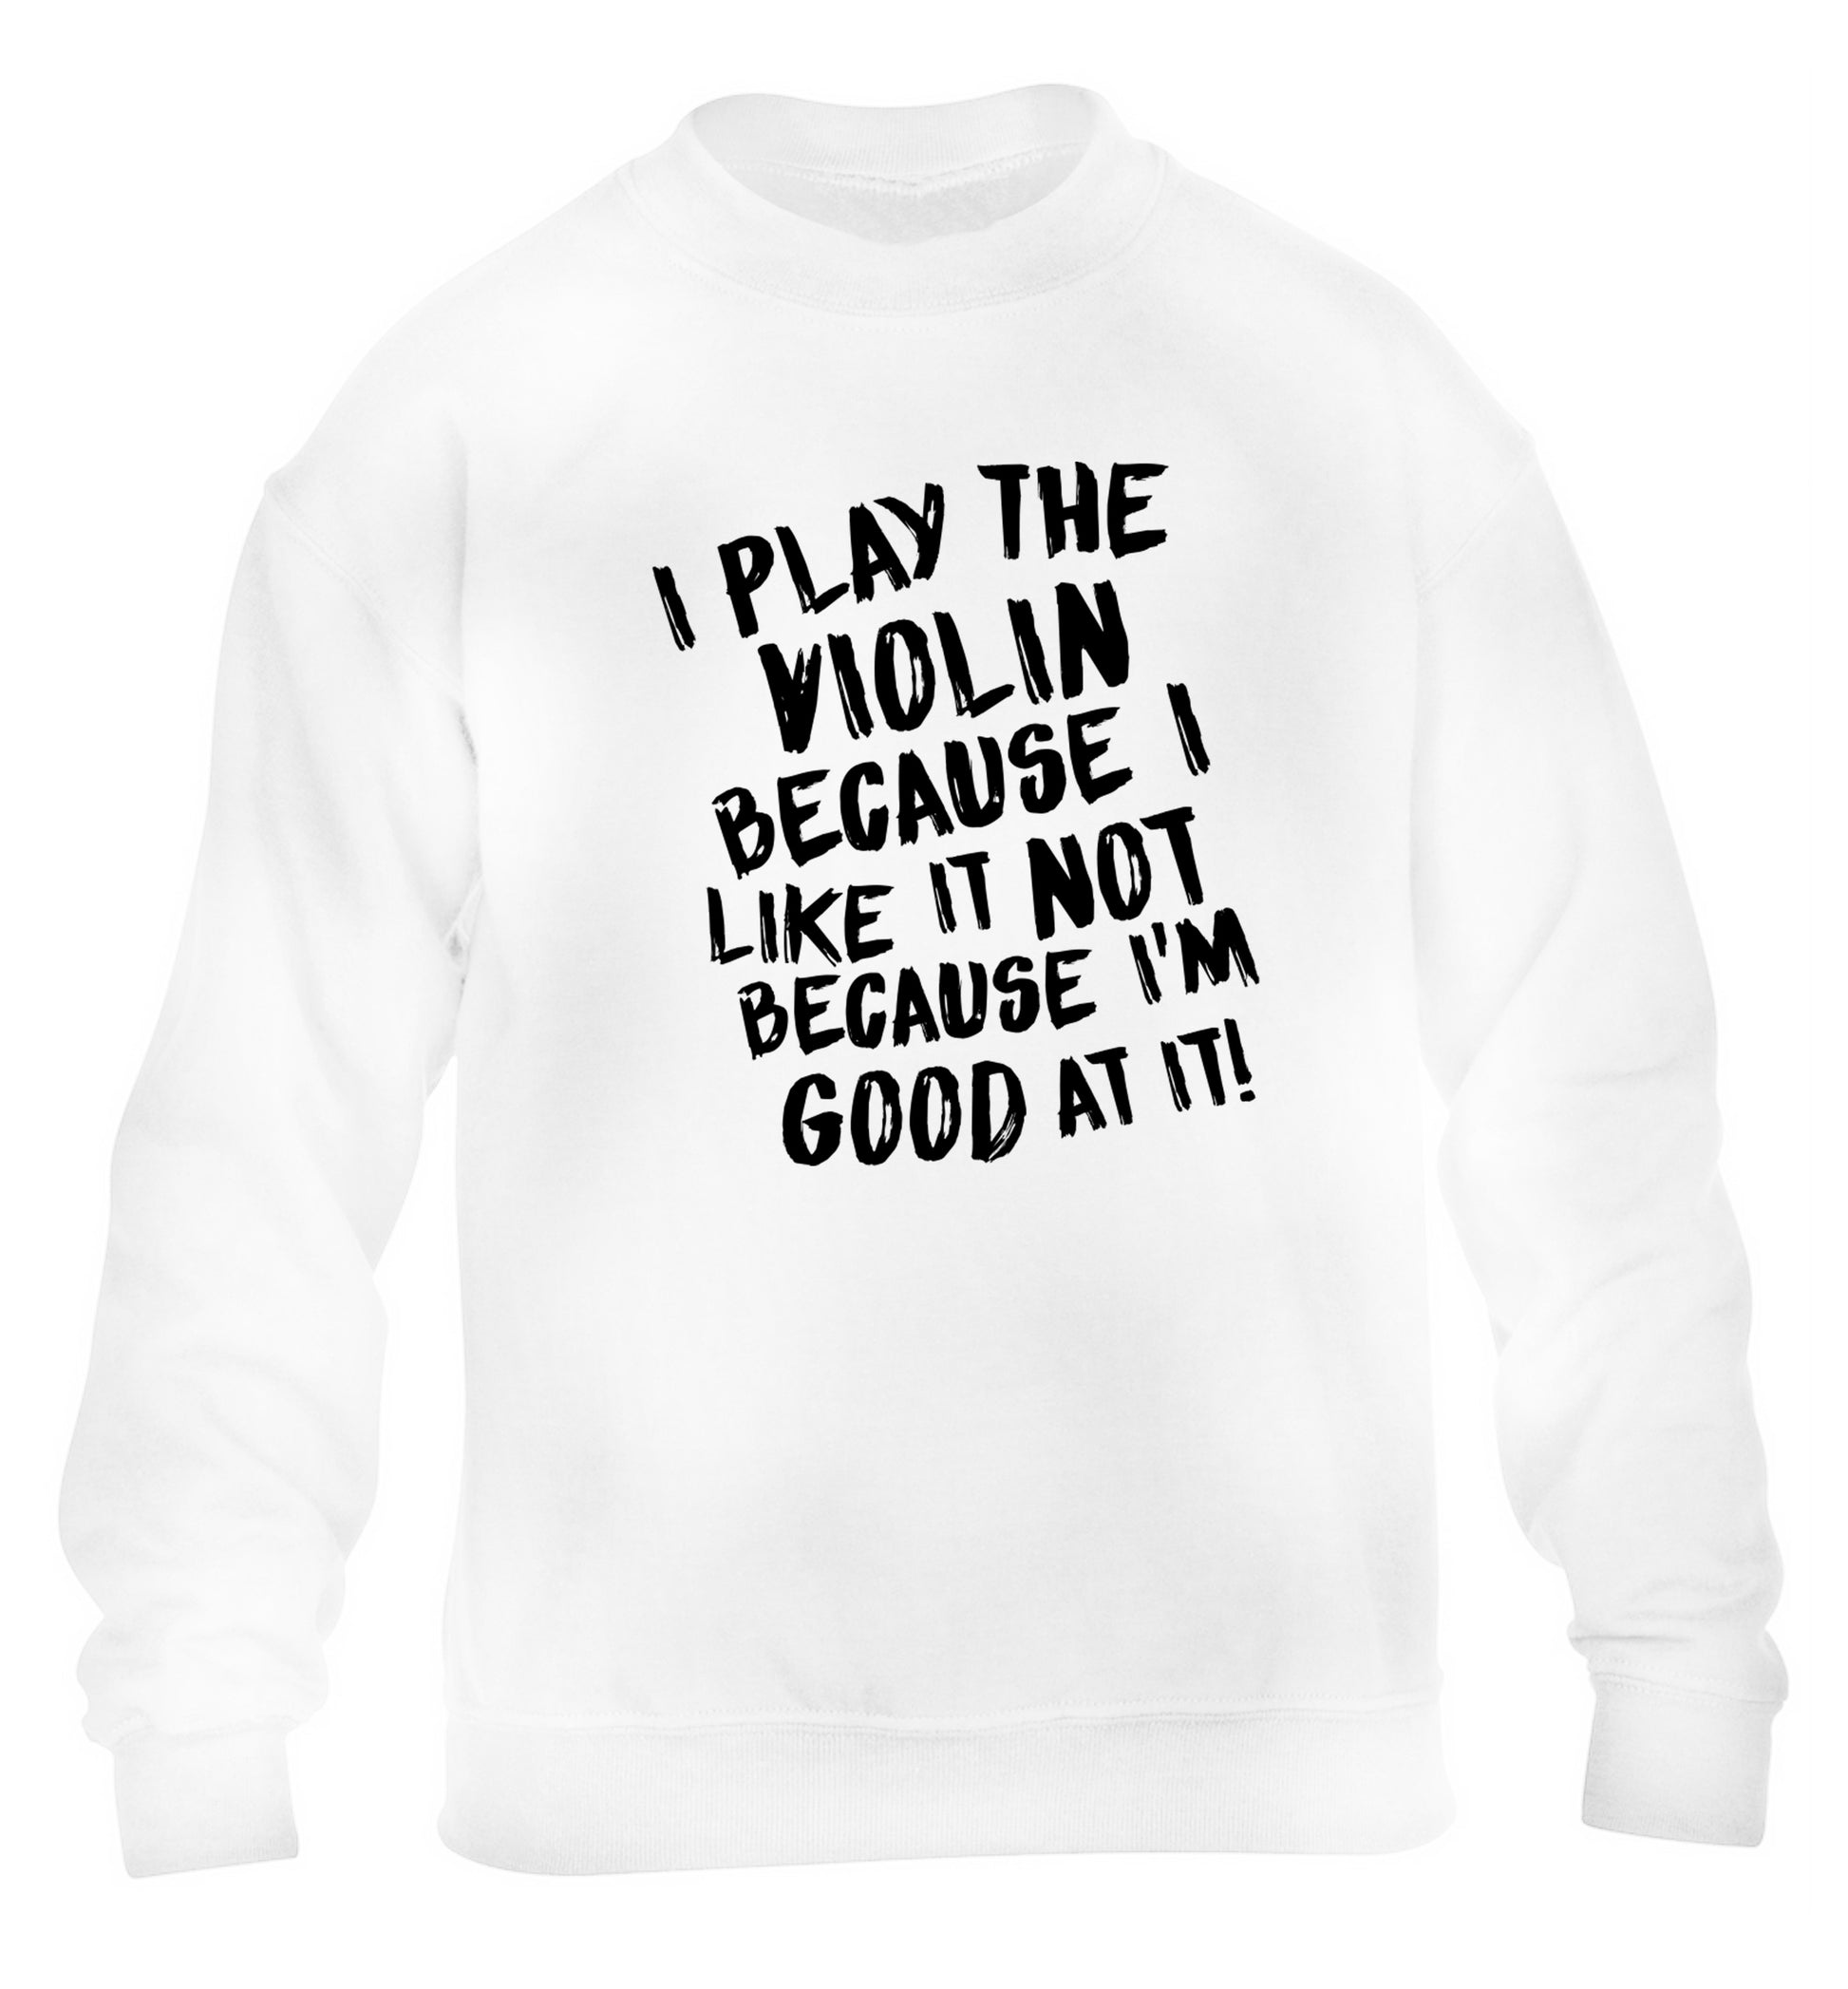 I play the violin because I like it not because I'm good at it children's white sweater 12-13 Years